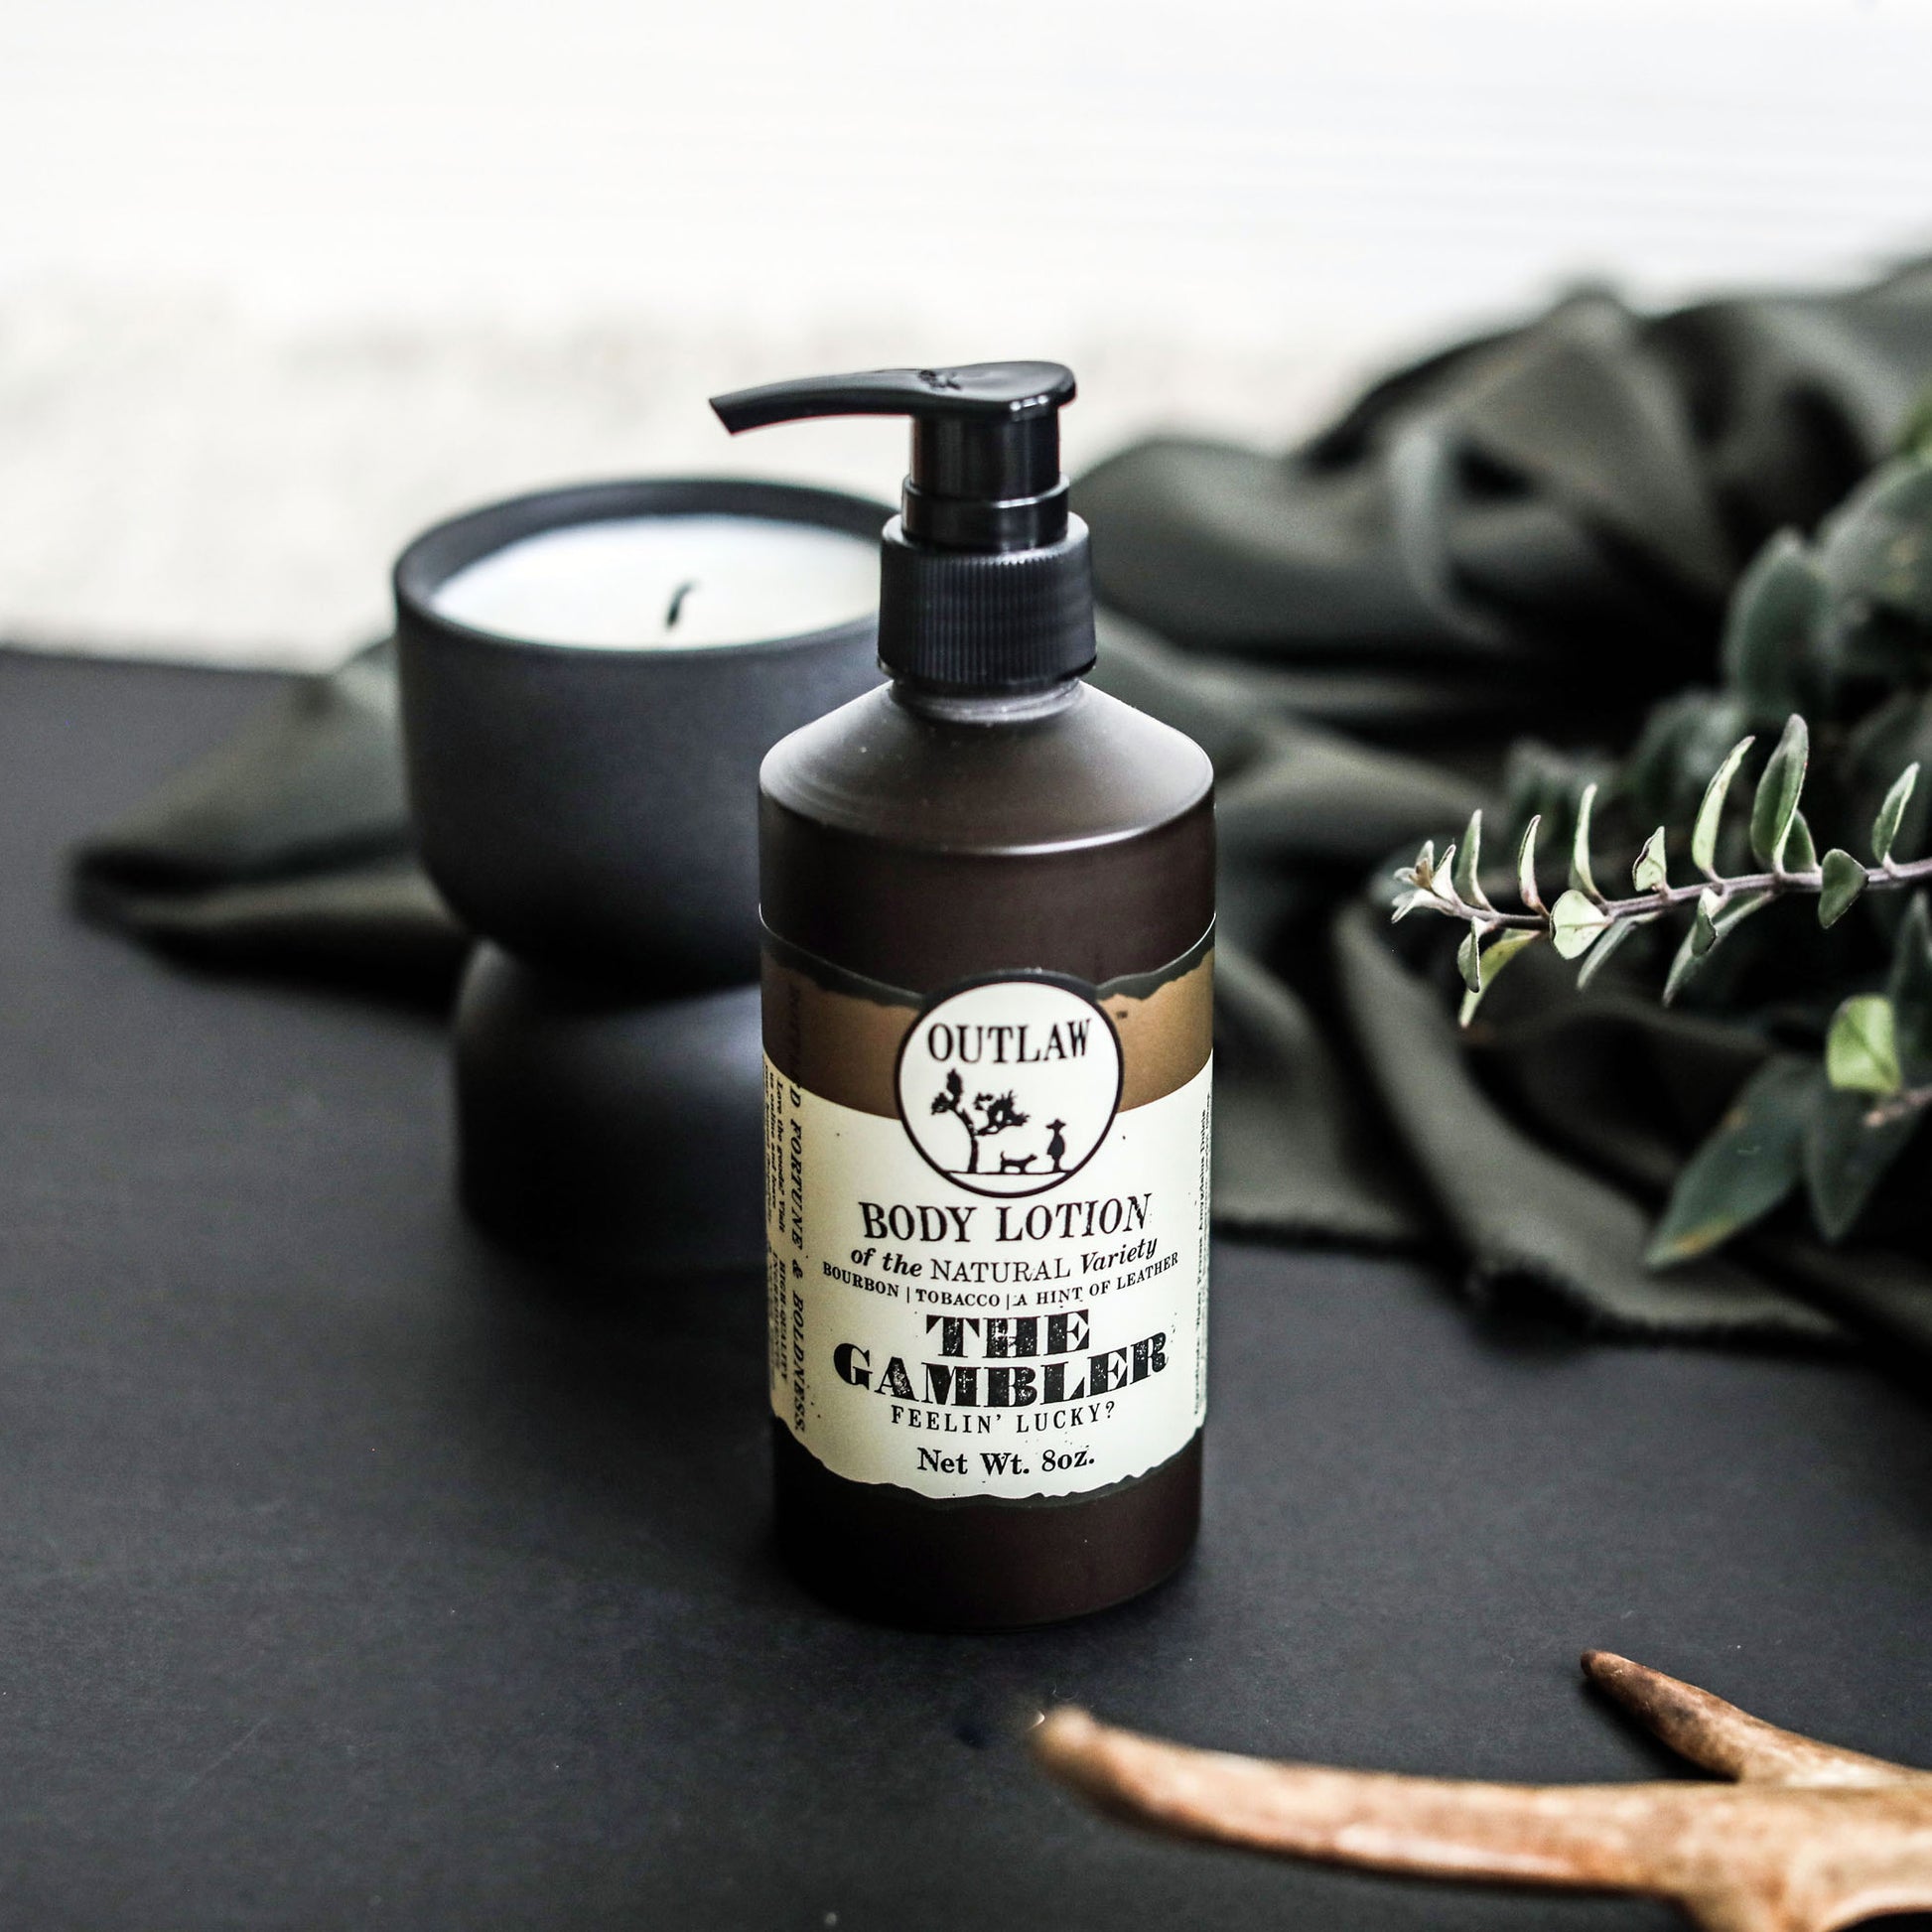 Outlaw The Gambler whiskey and leather scented natural body lotion